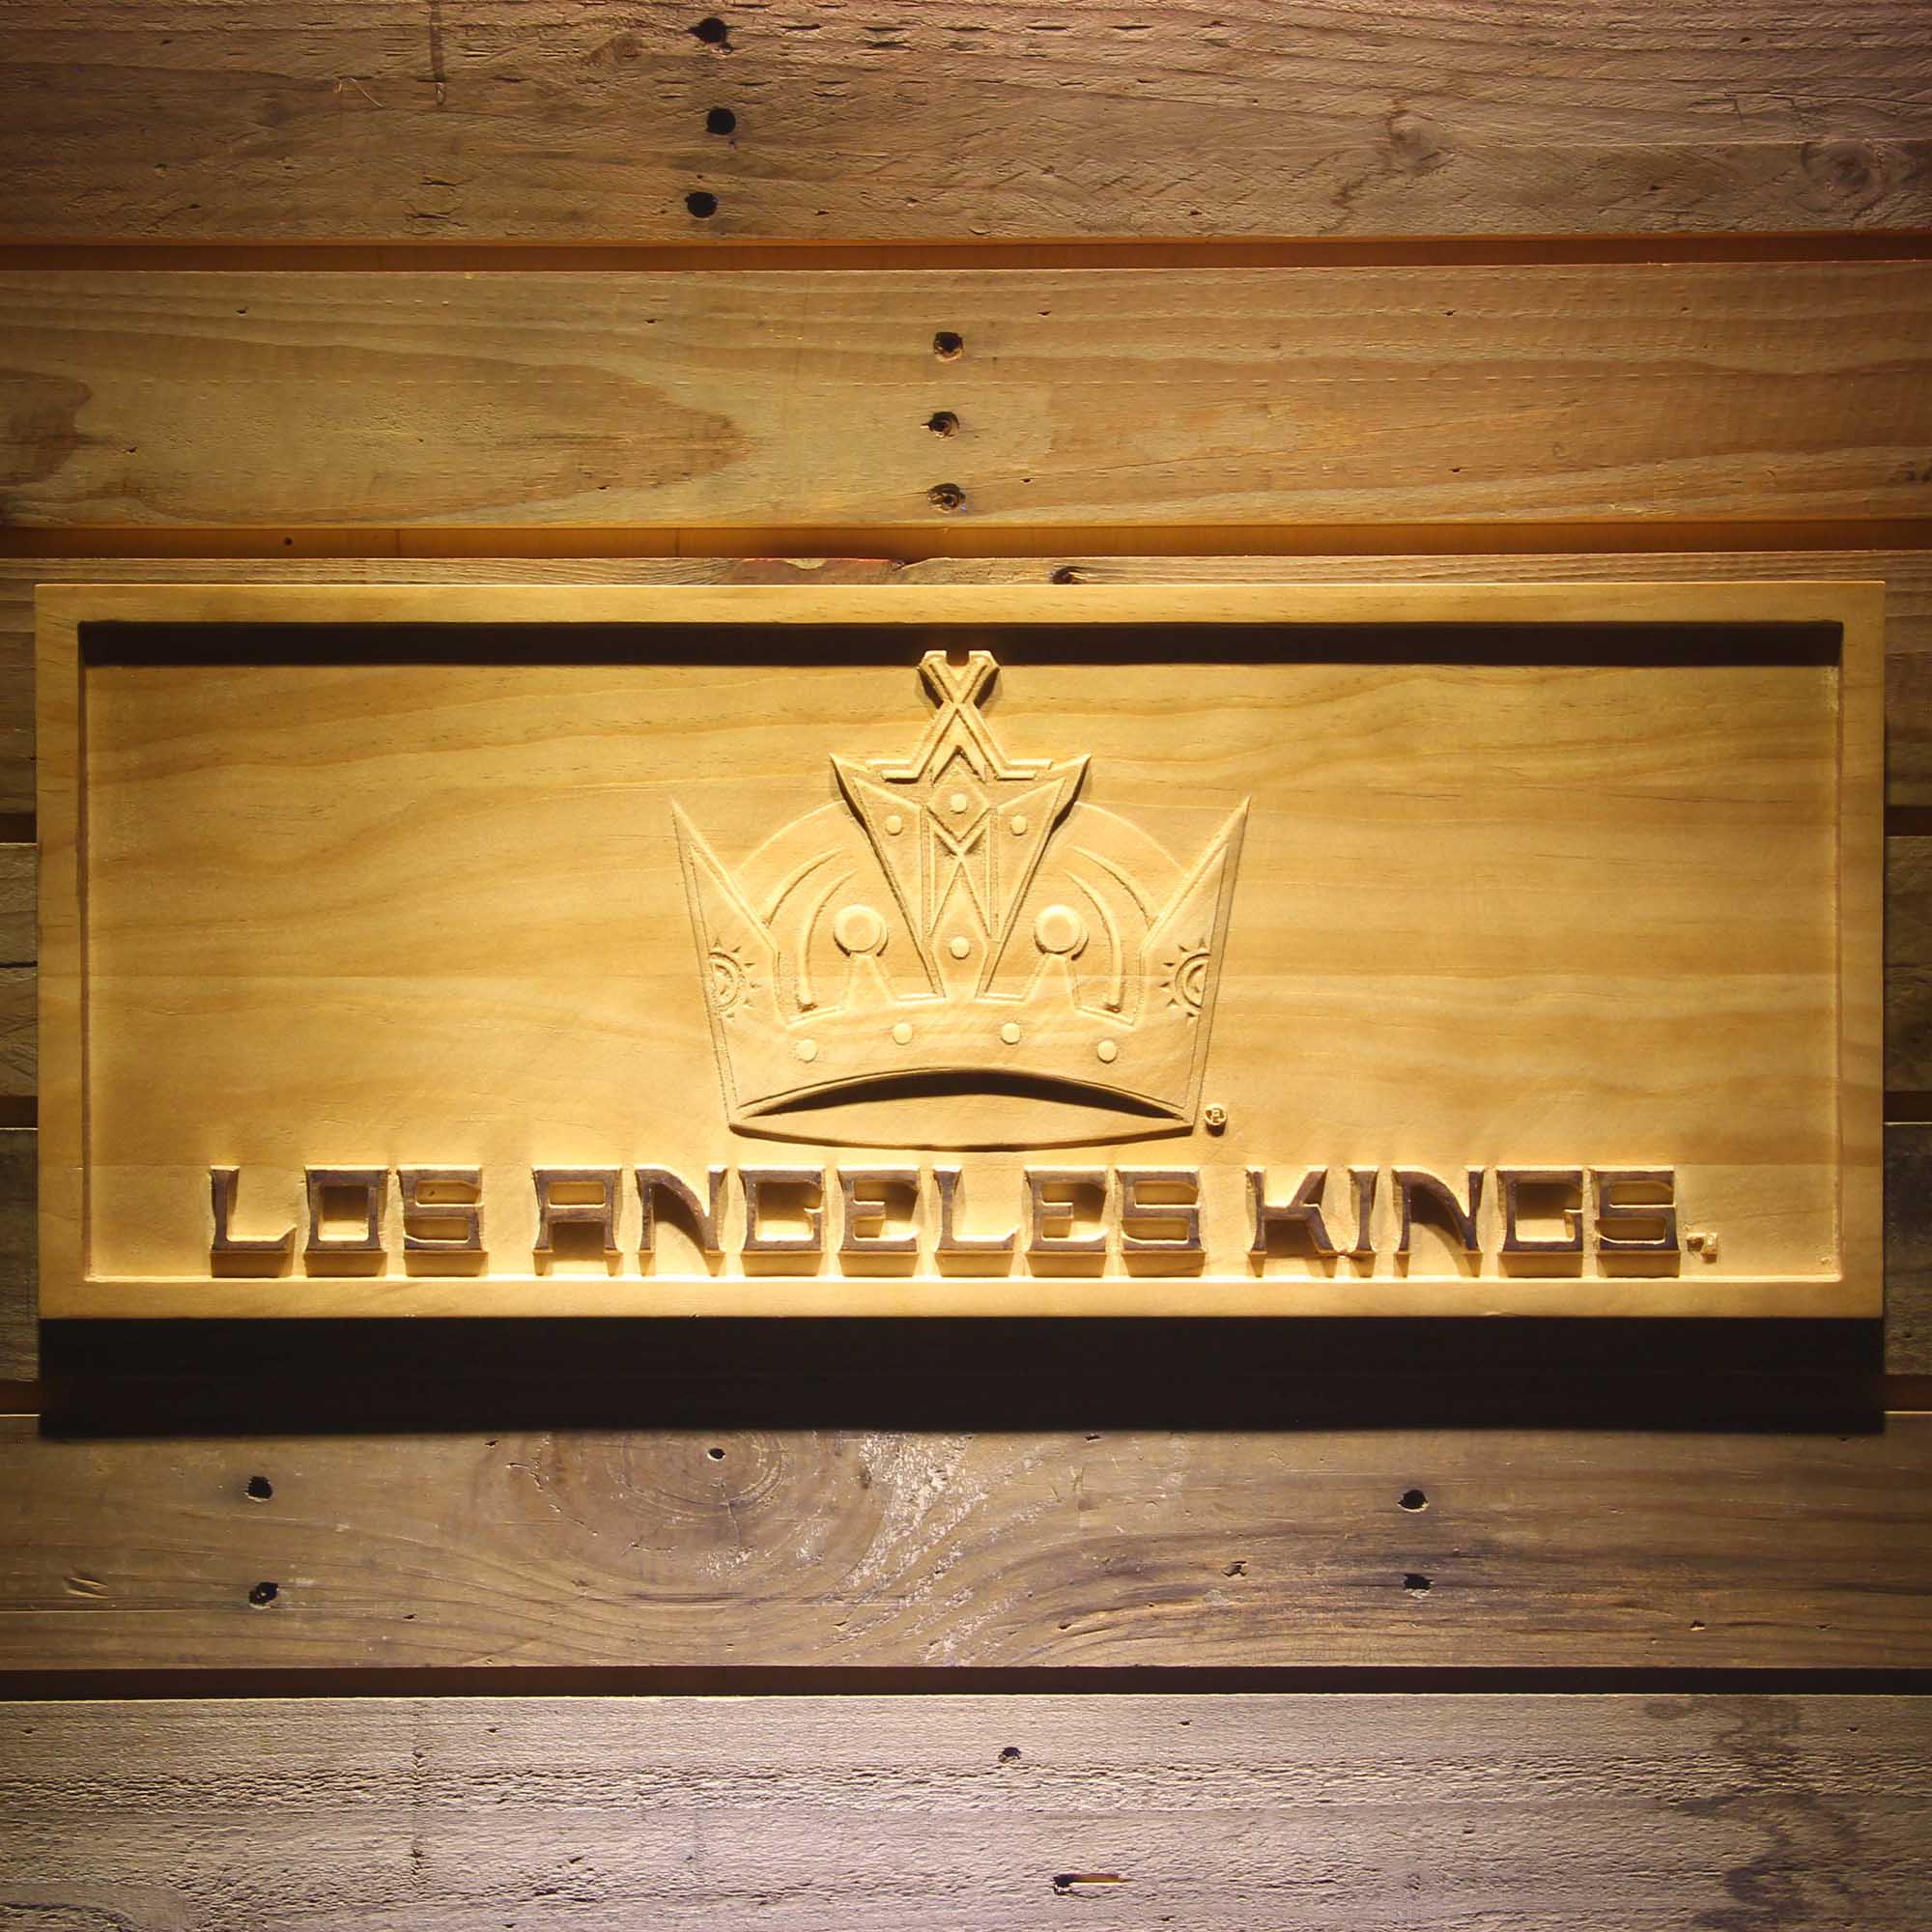 Los Angeles Kings 3D Solid Wooden Craving Sign